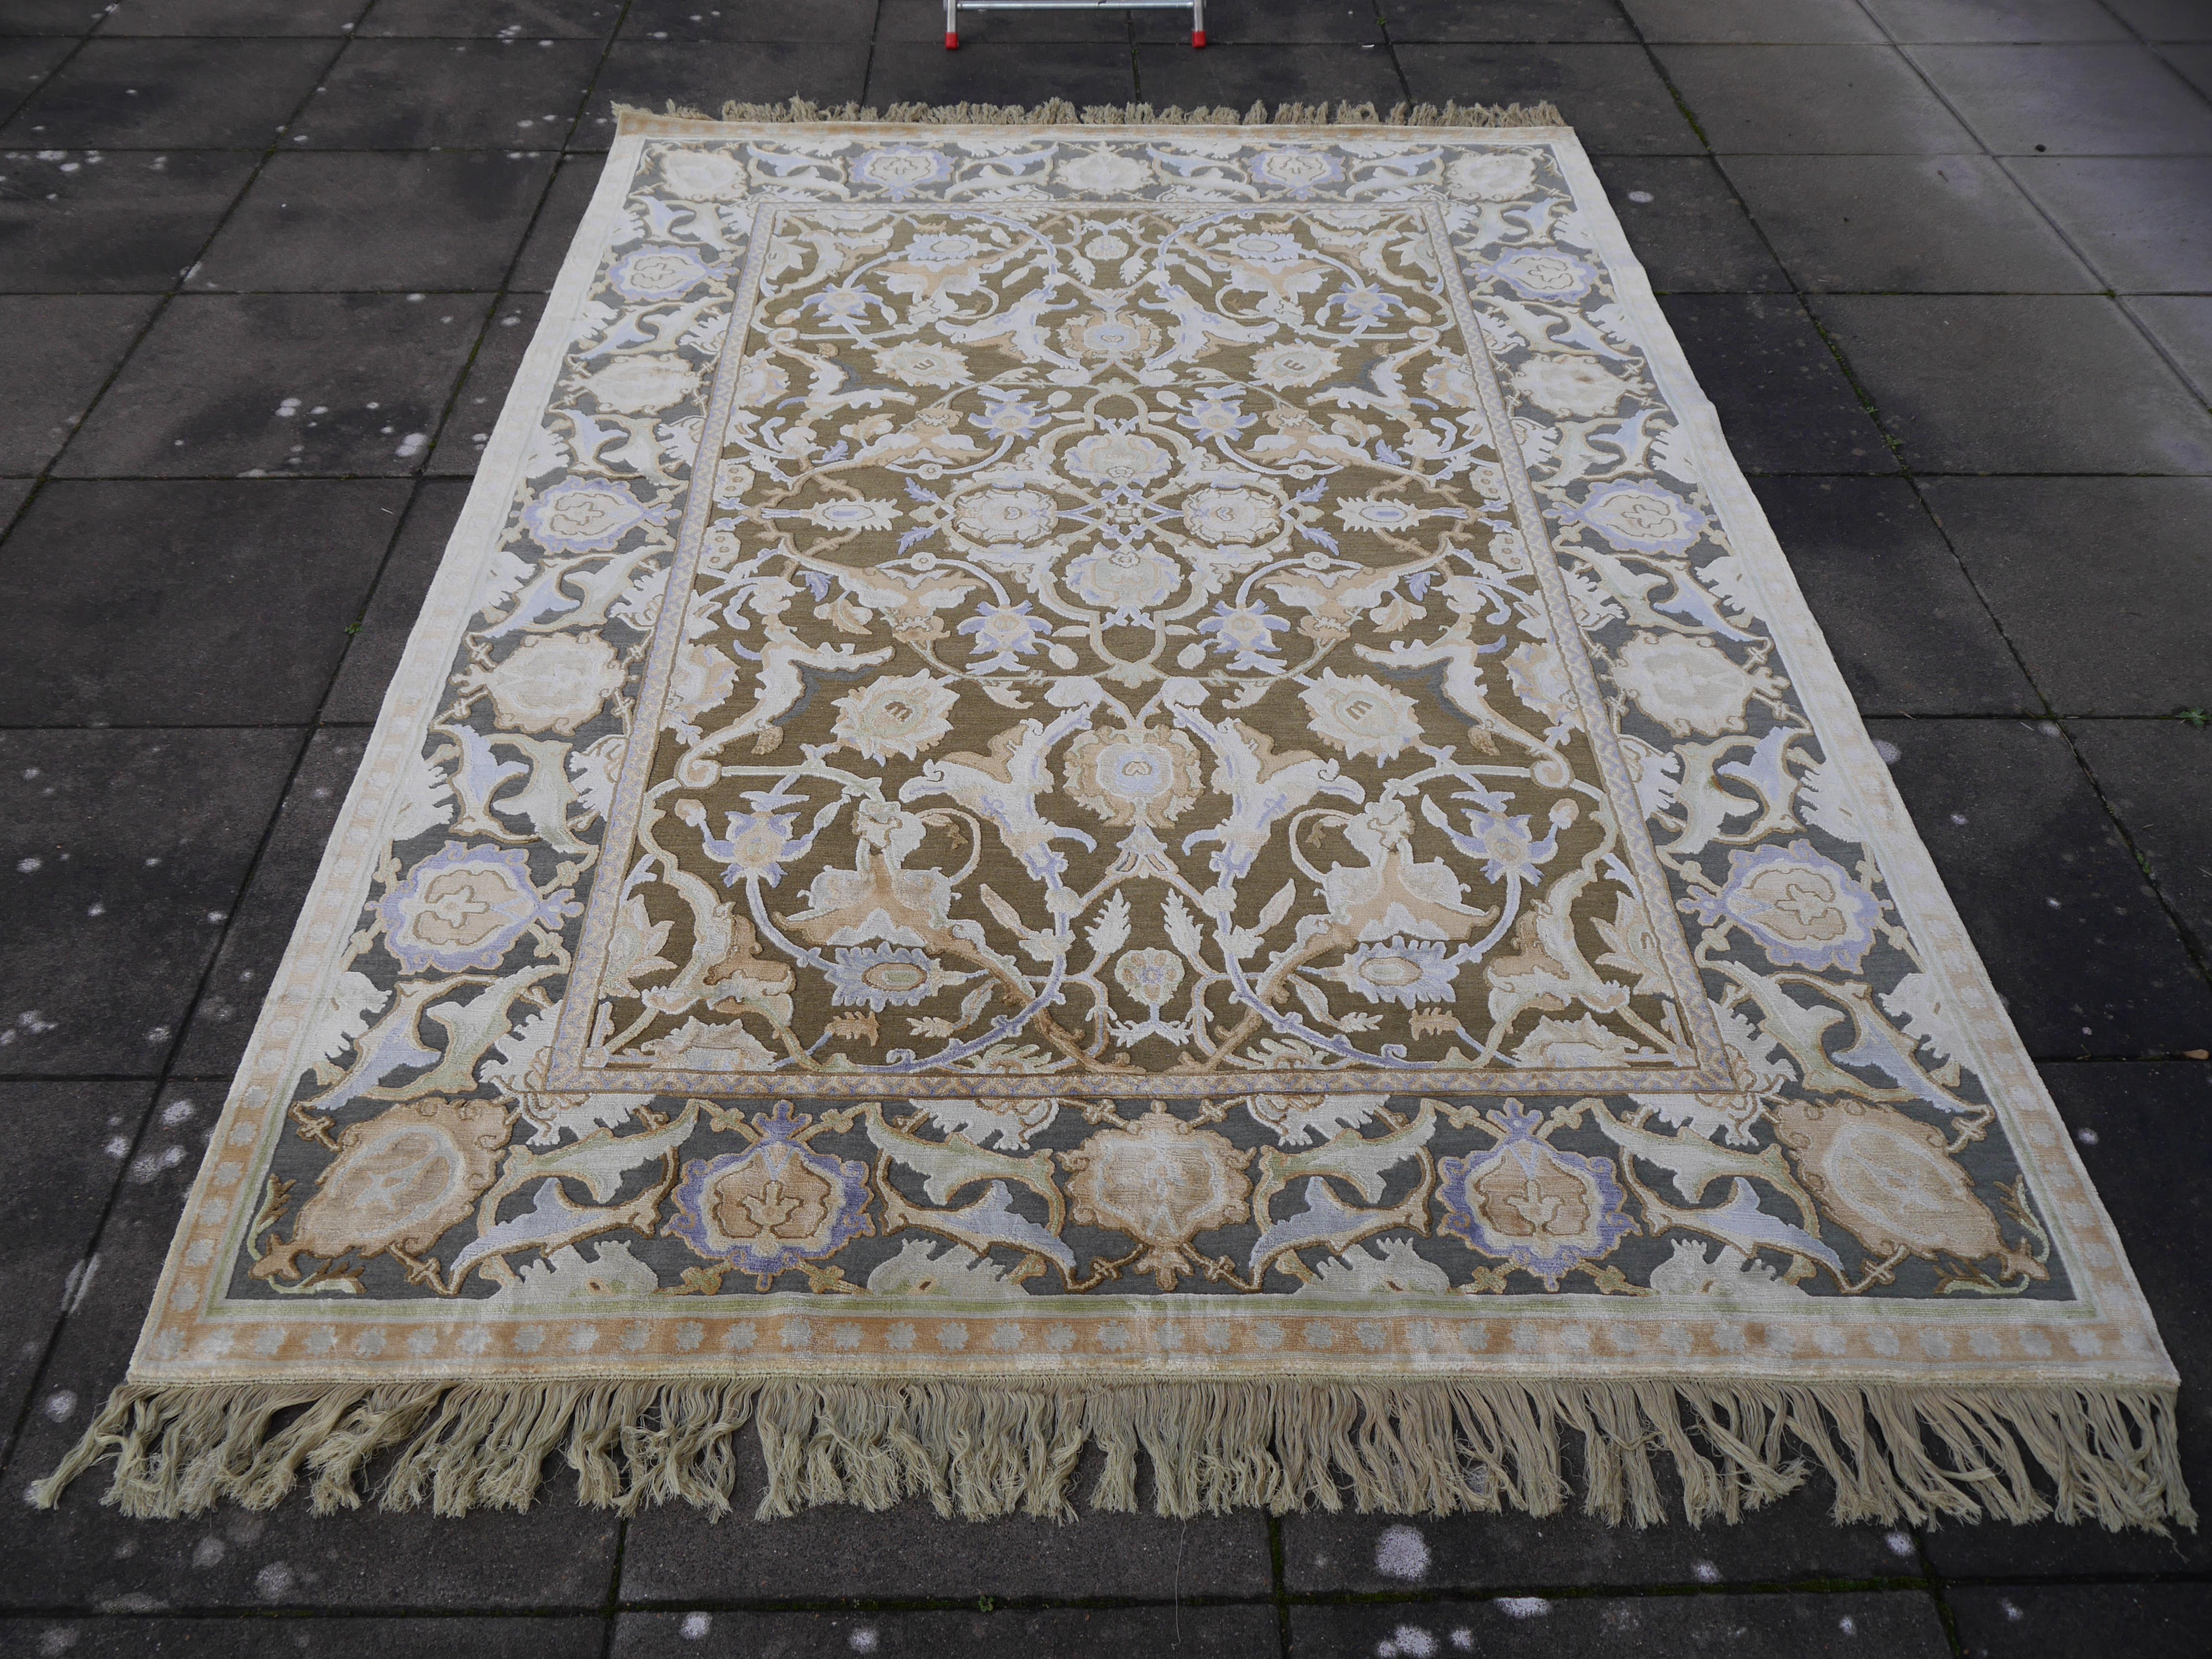 New Polonaise Rug Silk and Wool Antique Isfahan Design Bespoke Sizes 7